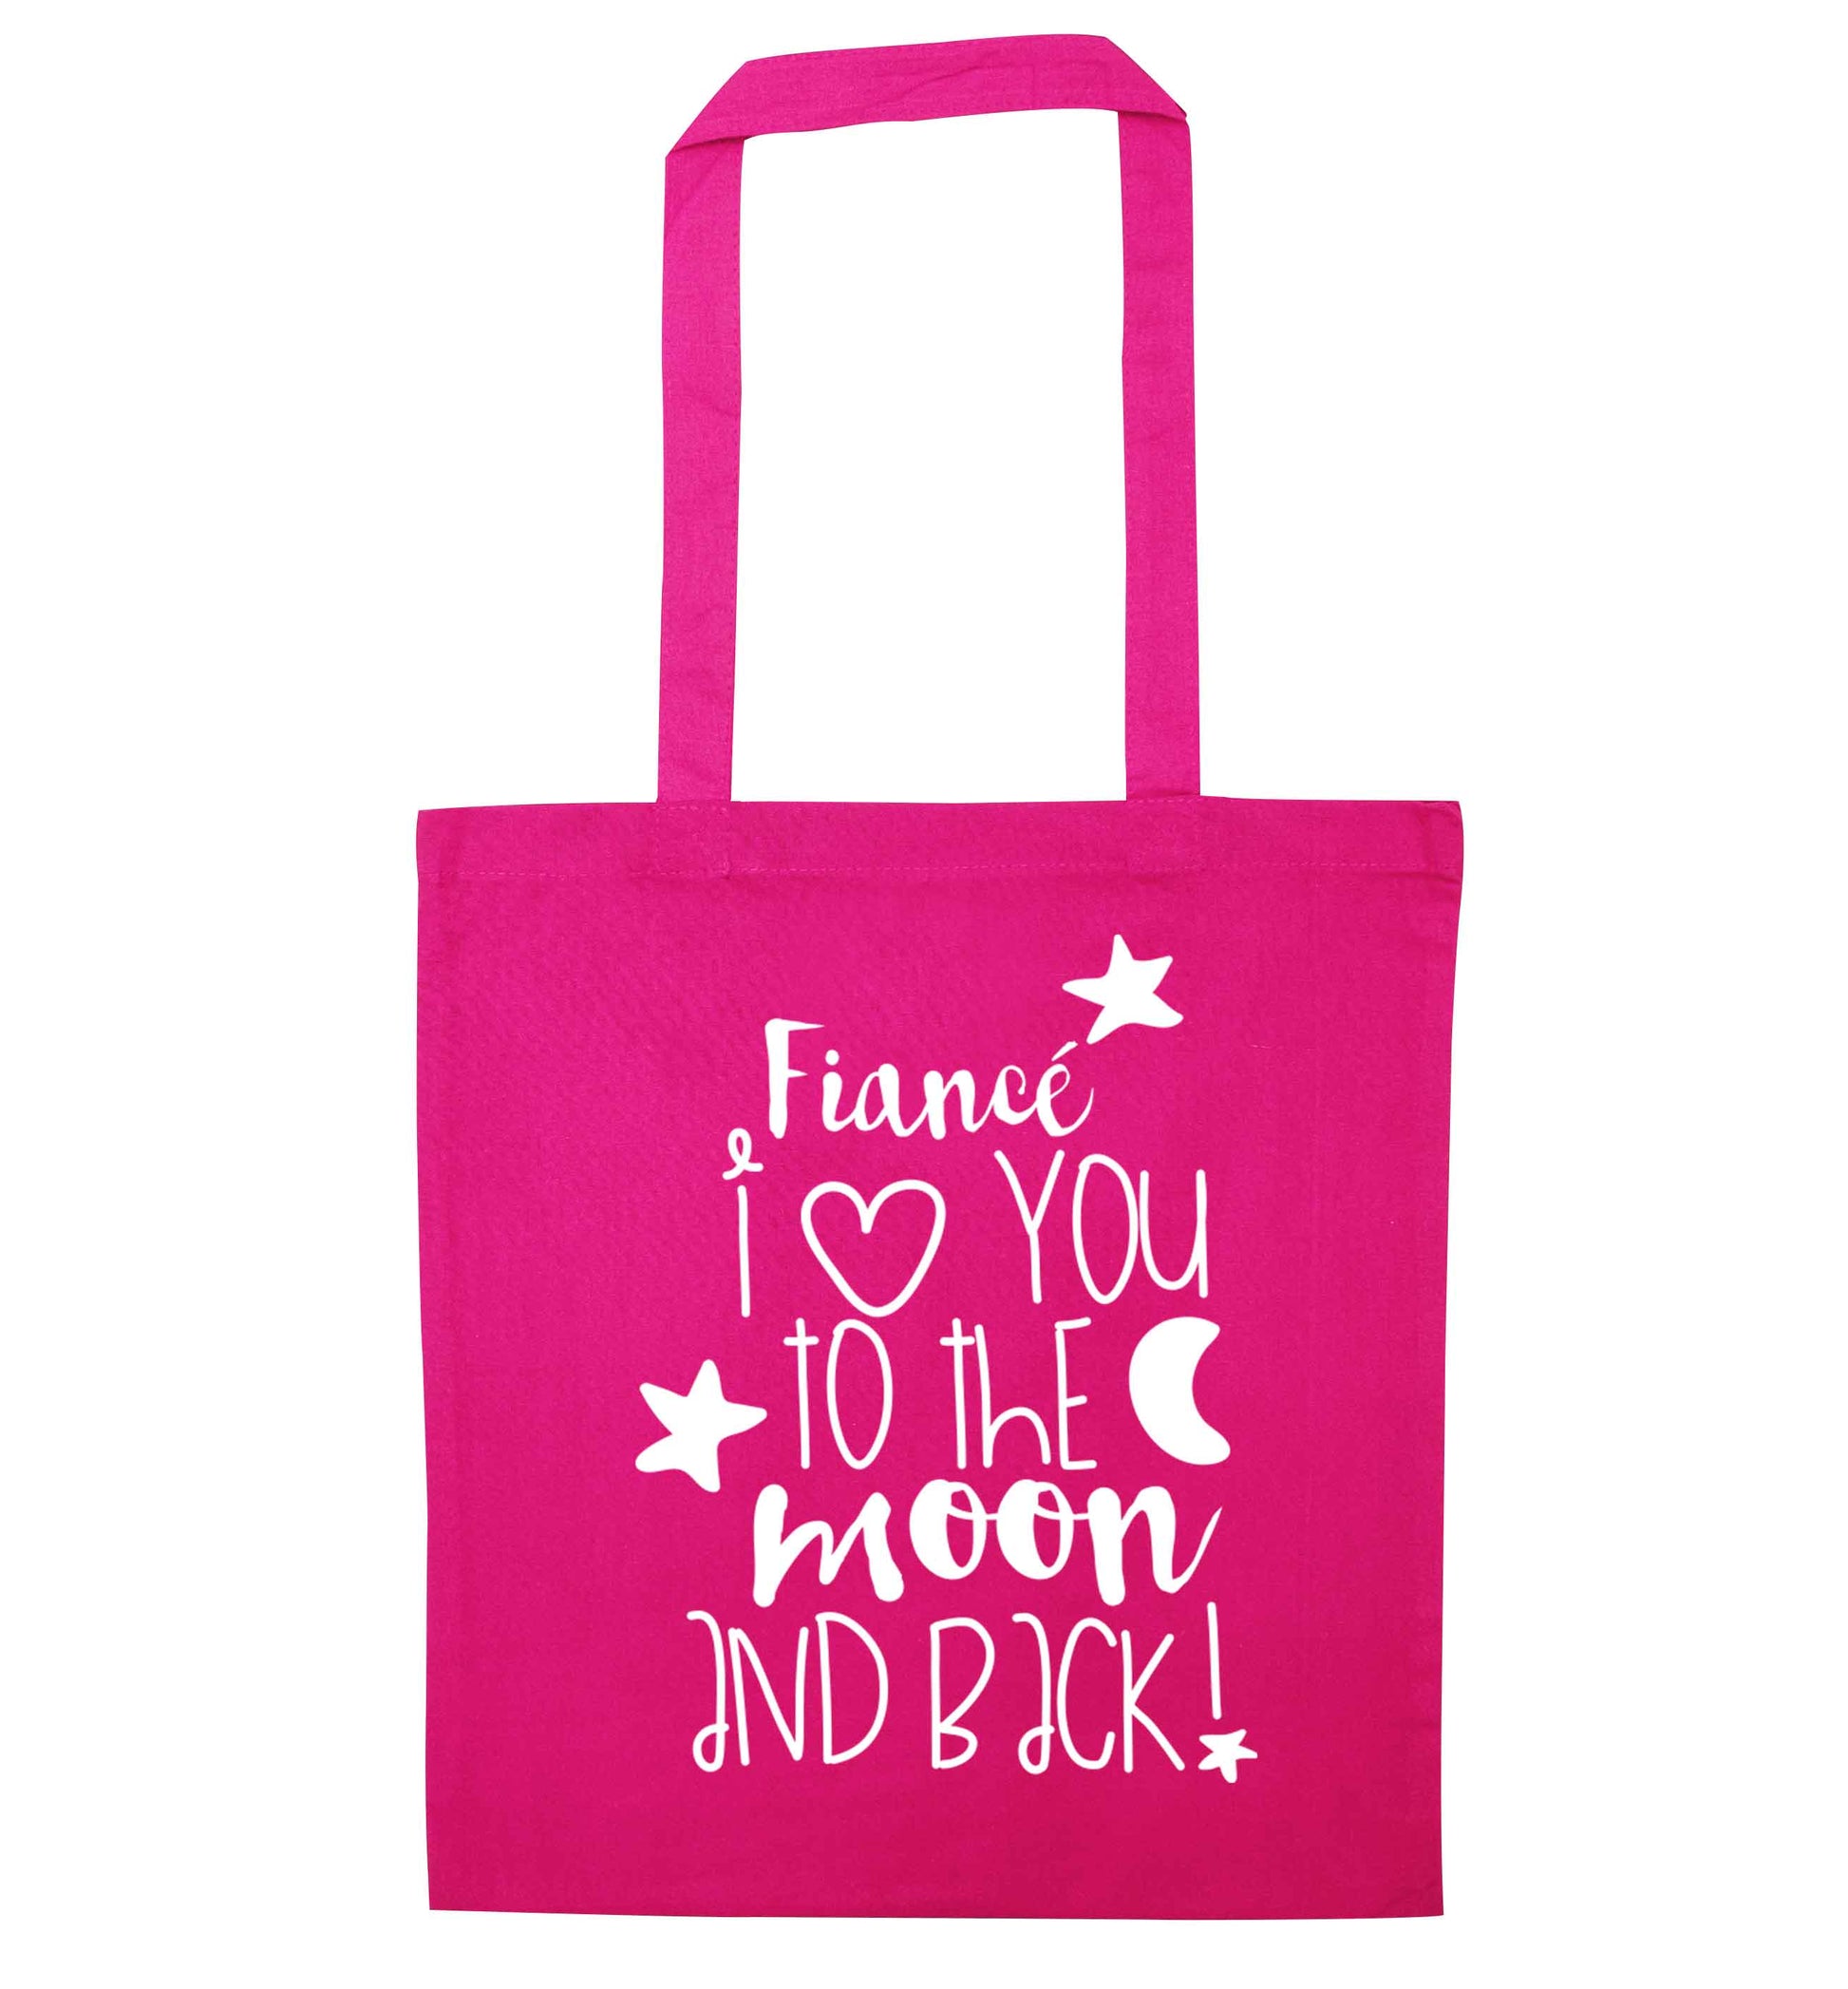 Fiancé I love you to the moon and back pink tote bag